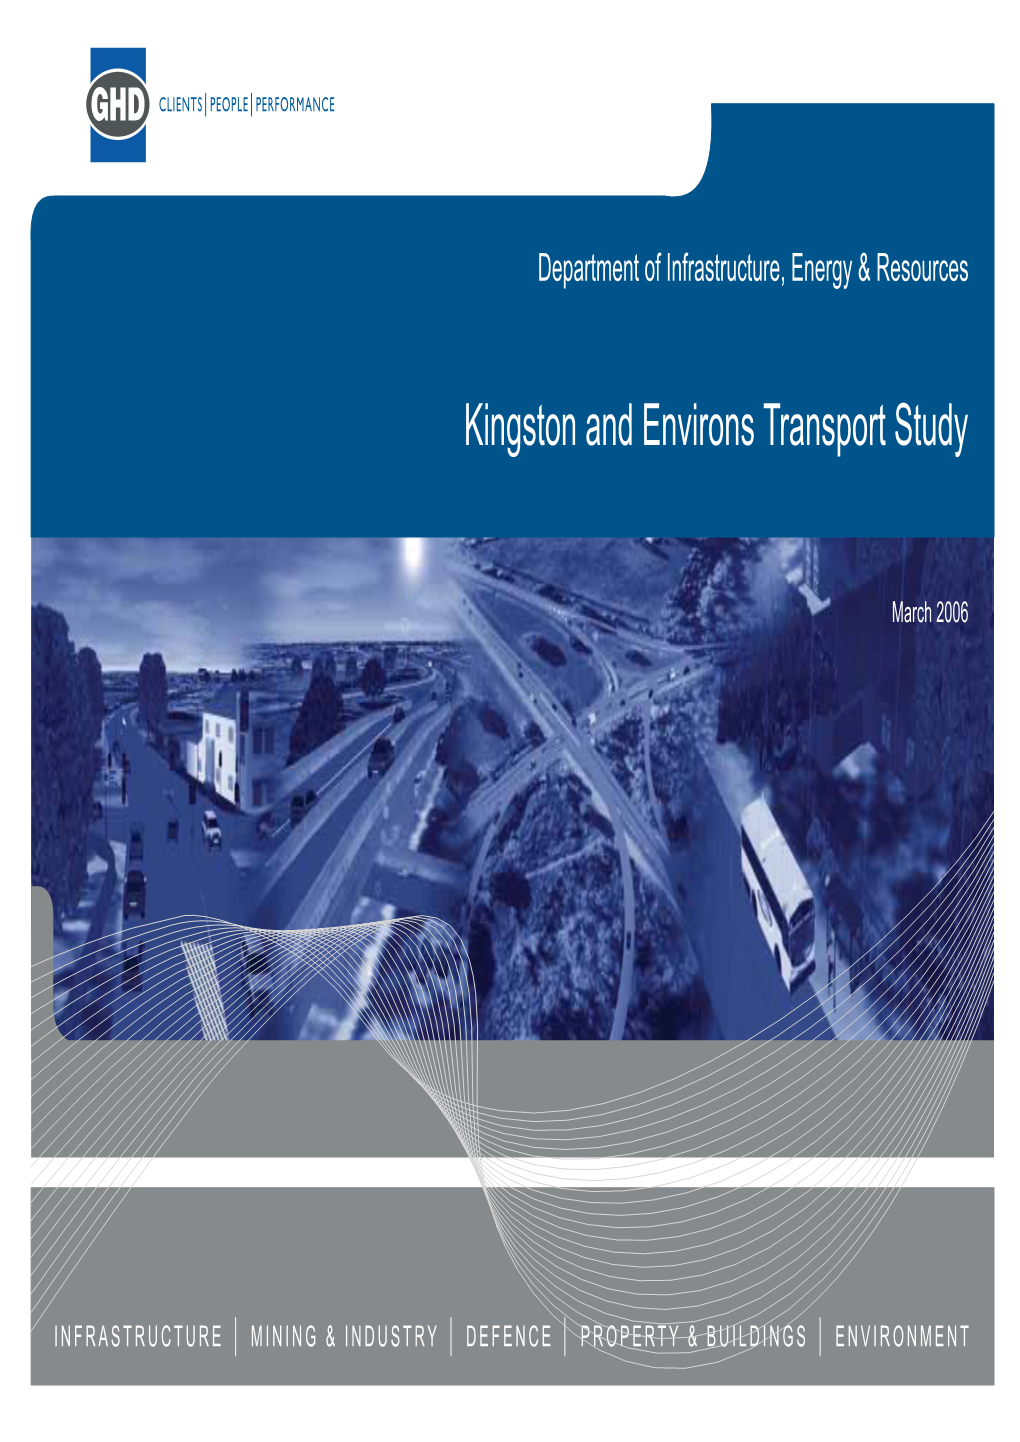 Kingston and Environs Transport Study